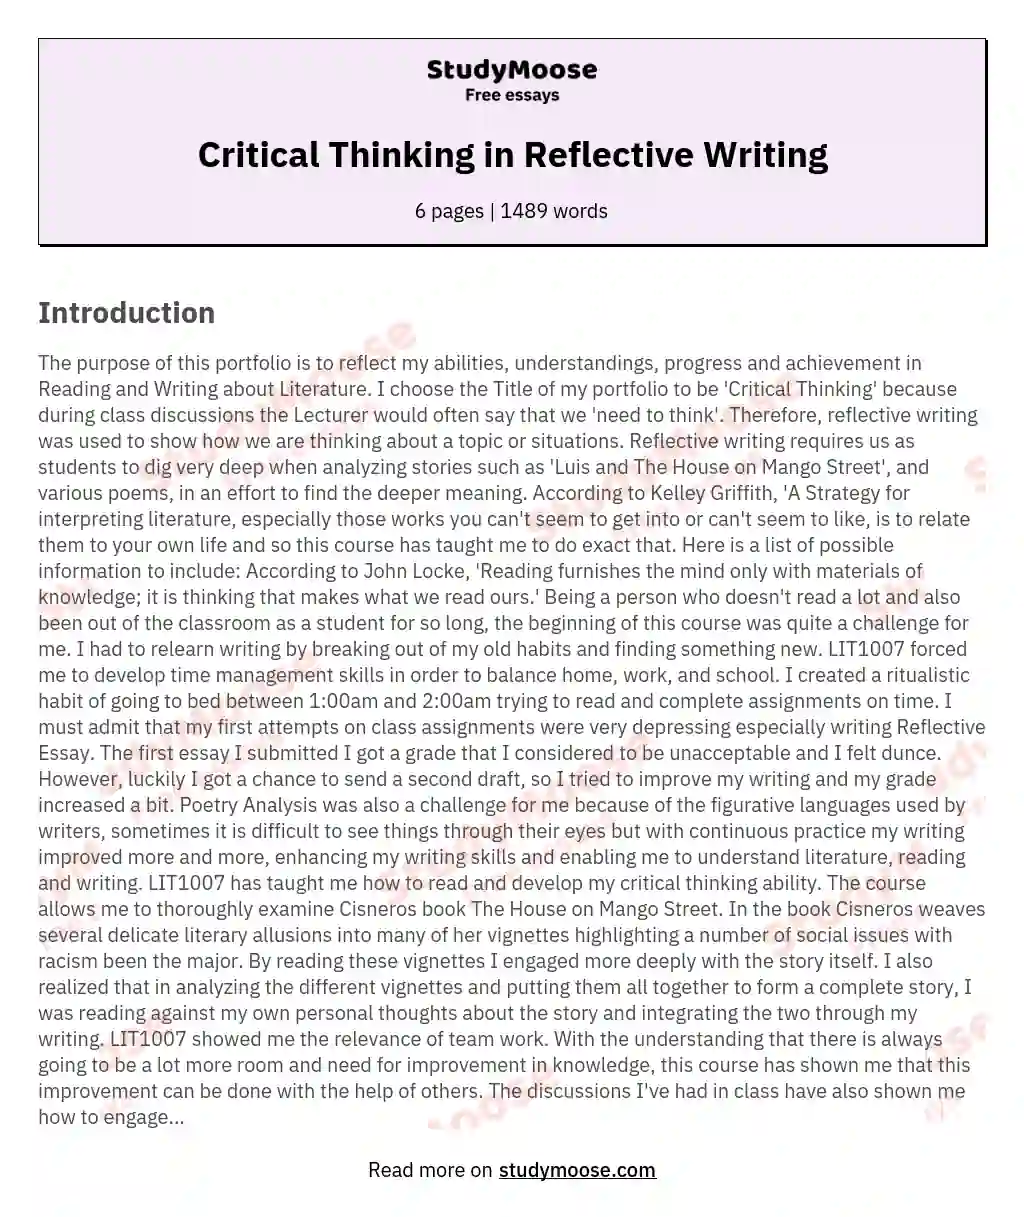 Critical Thinking in Reflective Writing essay